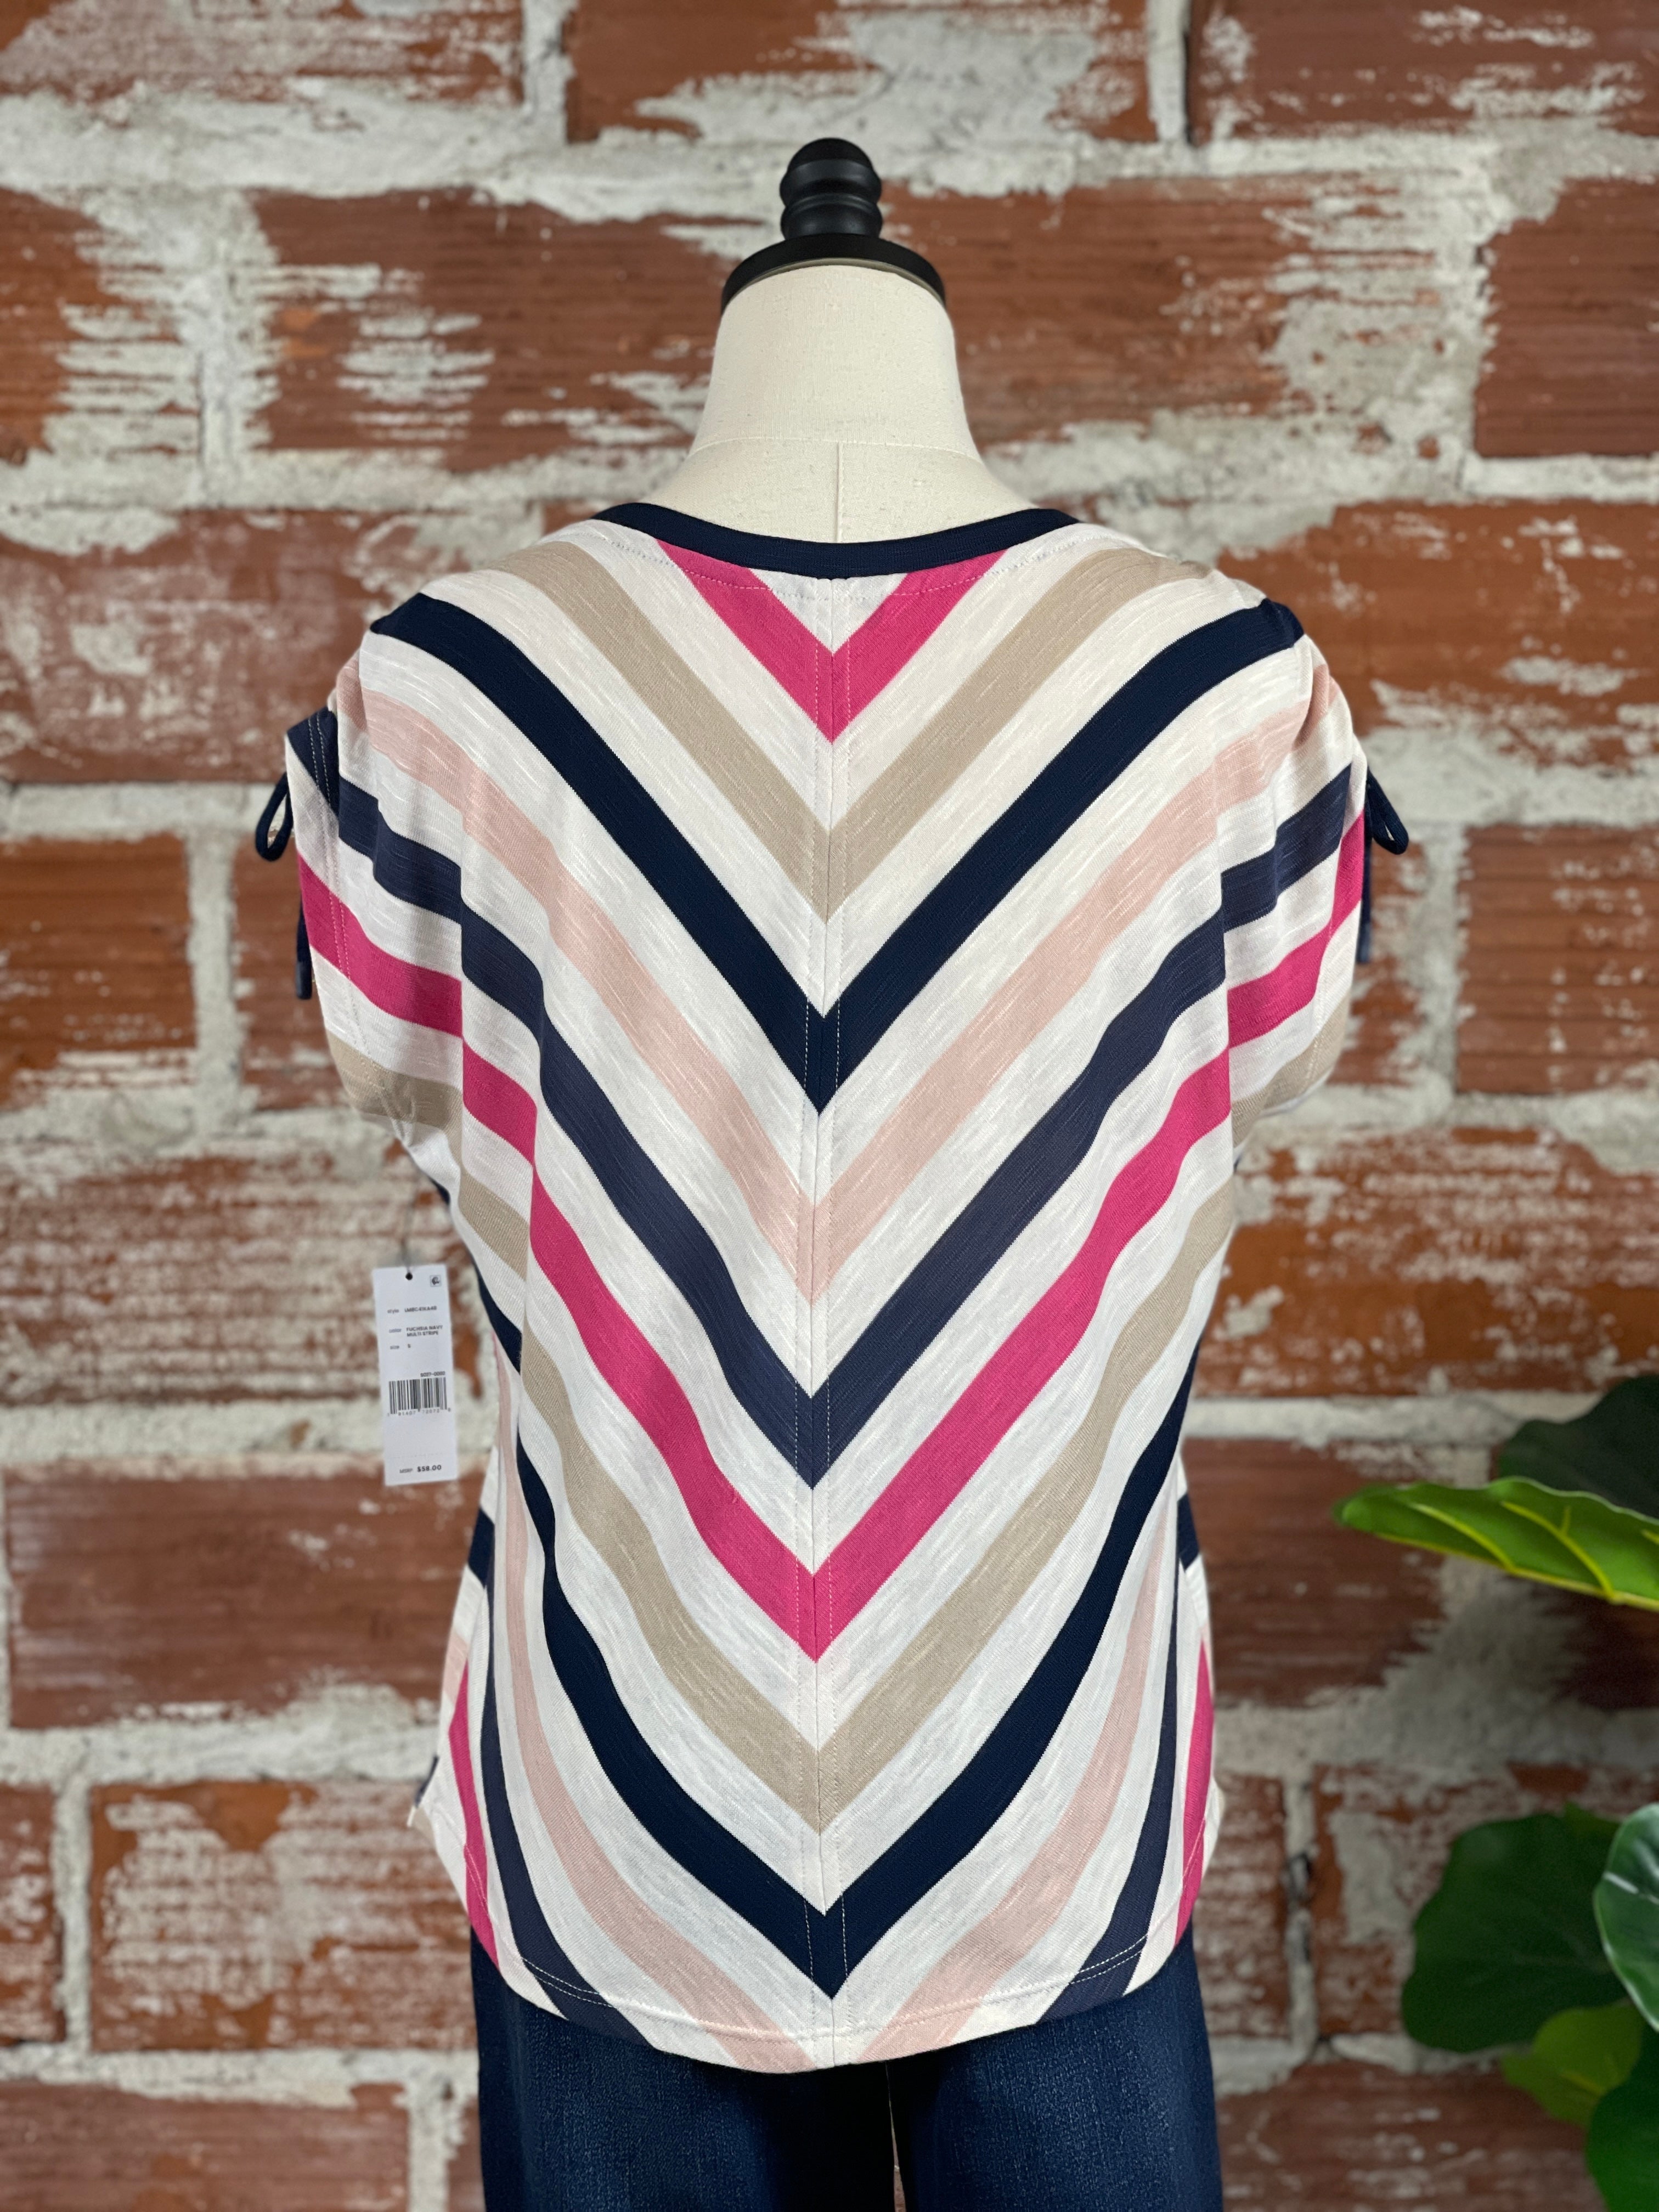 Liverpool Striped Top in Fuchsia and Navy-122 - Jersey Tops S/S (Jan - June)-Little Bird Boutique